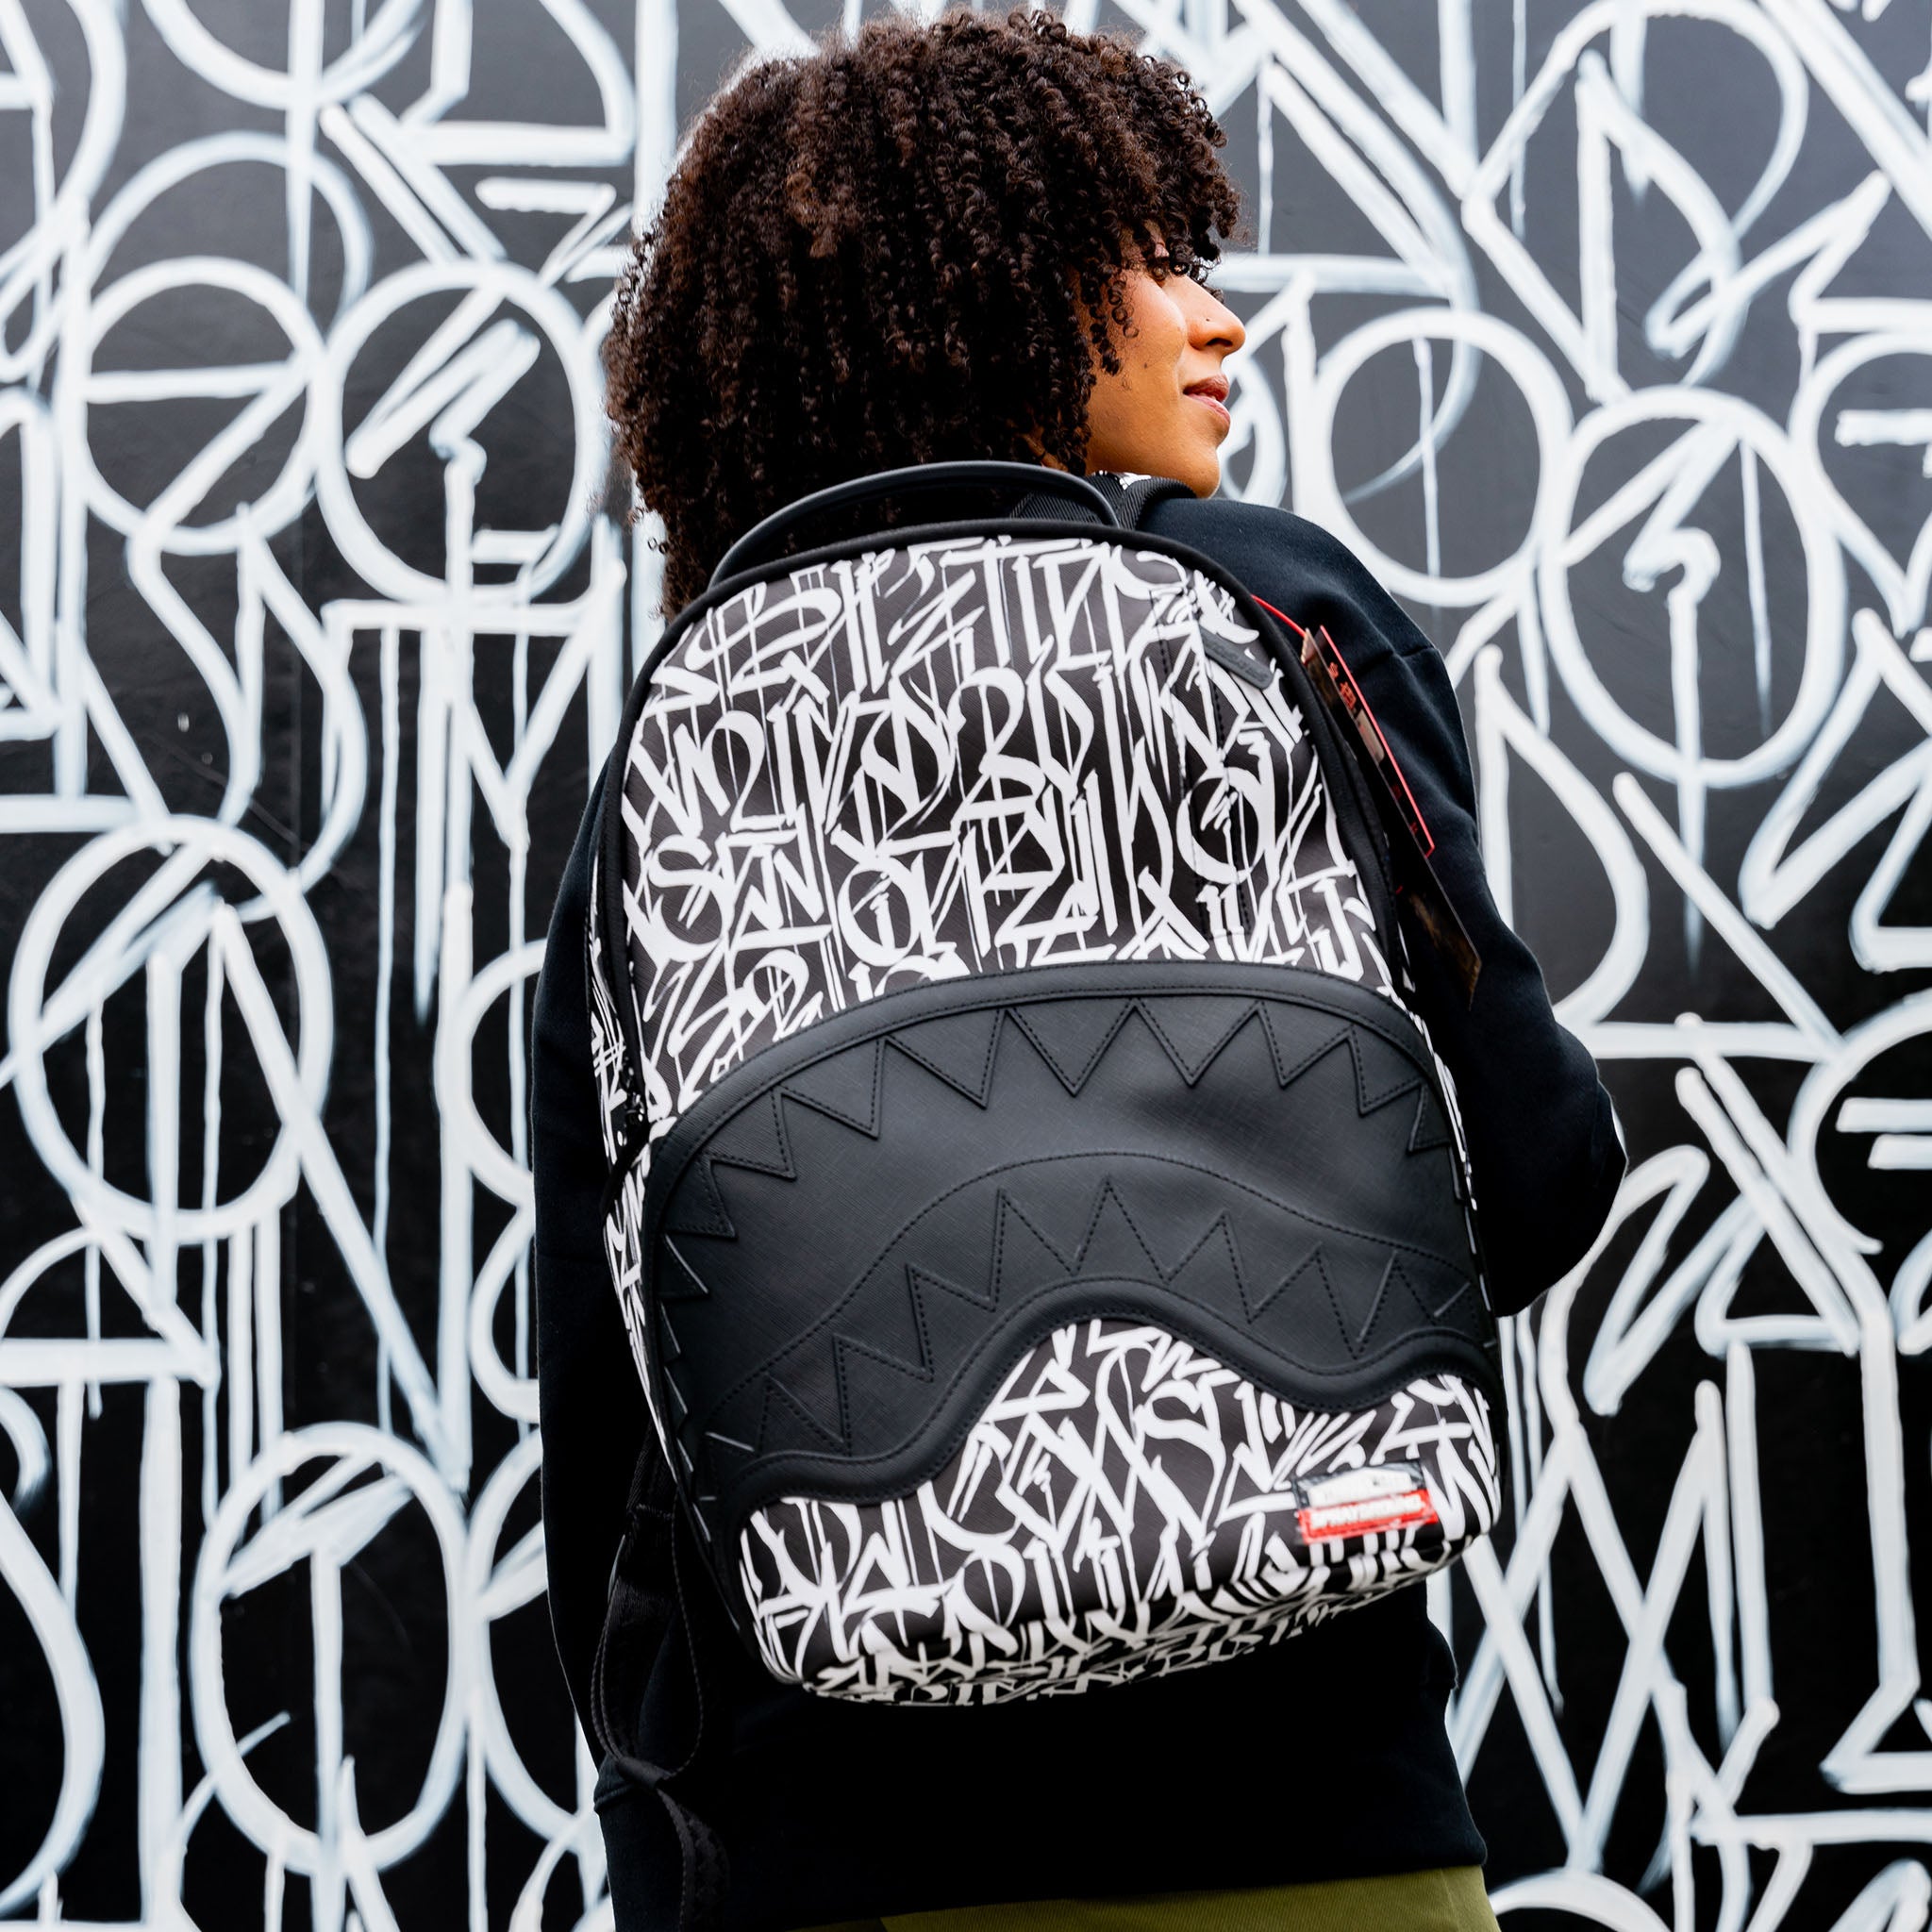 Defer INFINITY ARMY Backpack